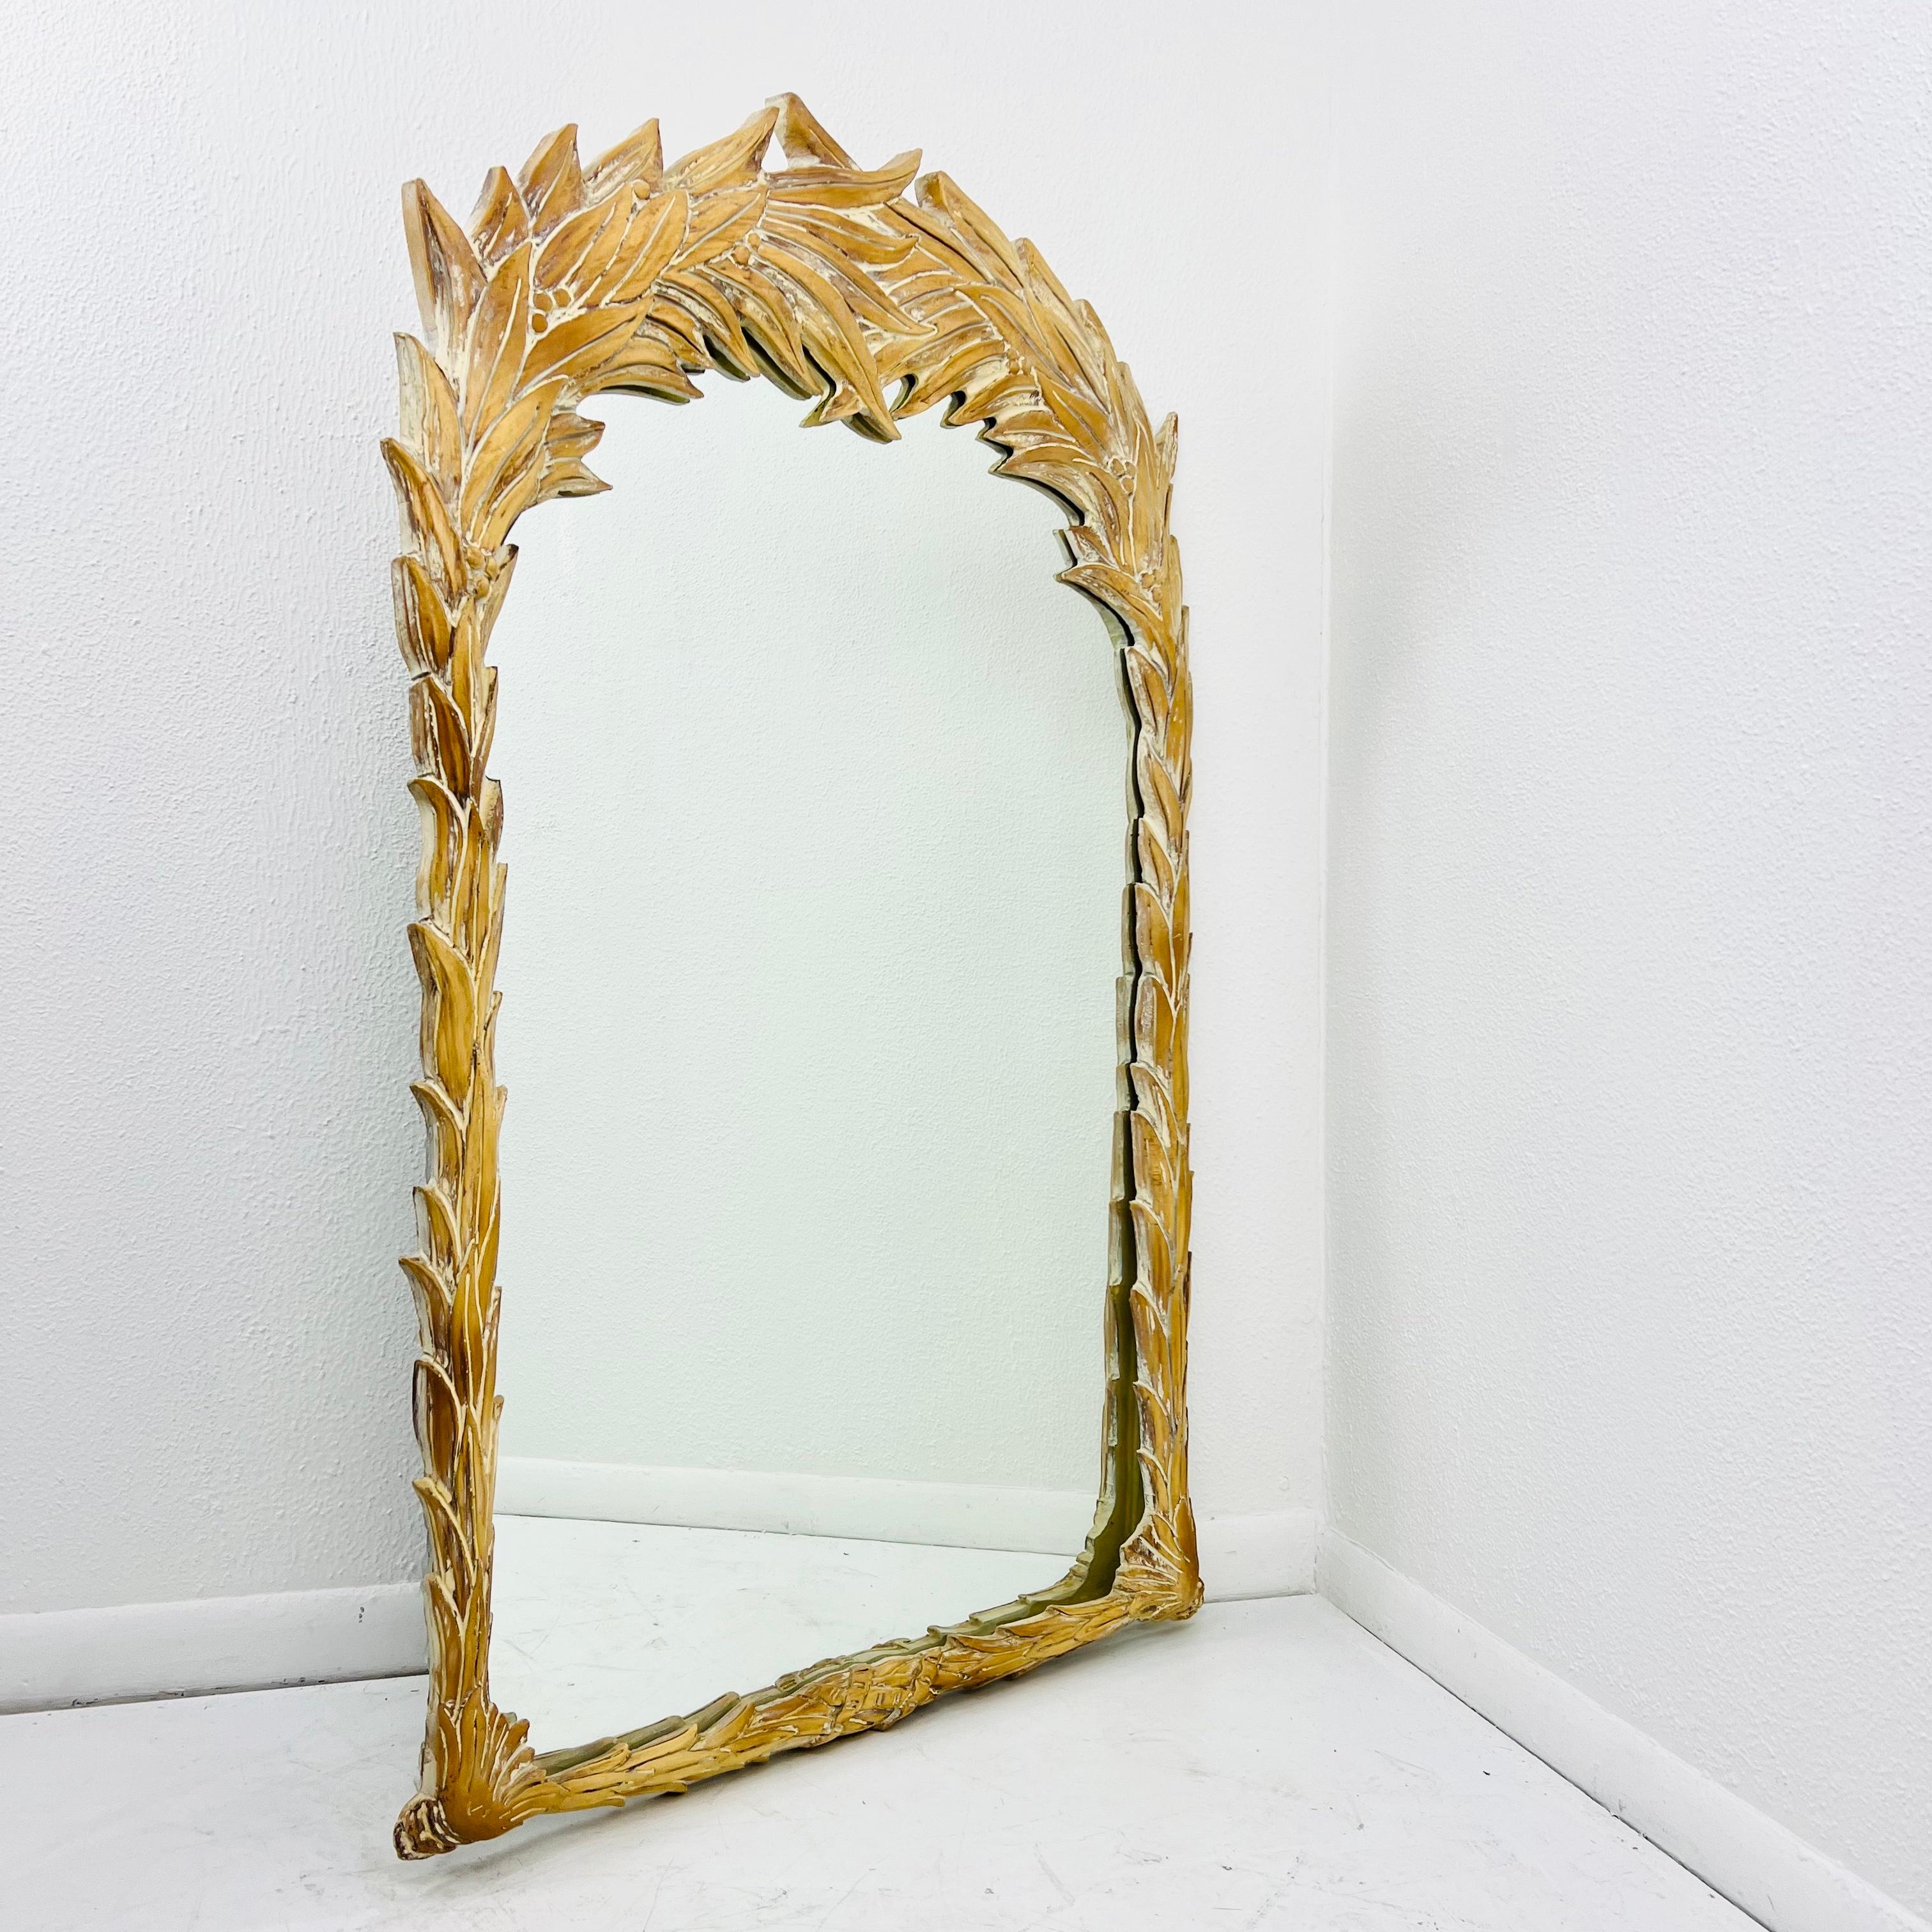 Sculptural palm leaf wall mirror in the manner of modernist designer Serge Roche. Whitewash finish accents the gorgeous details in the sculptural palm fronds surrounding the mirror. Good vintage condition with one chipped edge of frame (pictured).